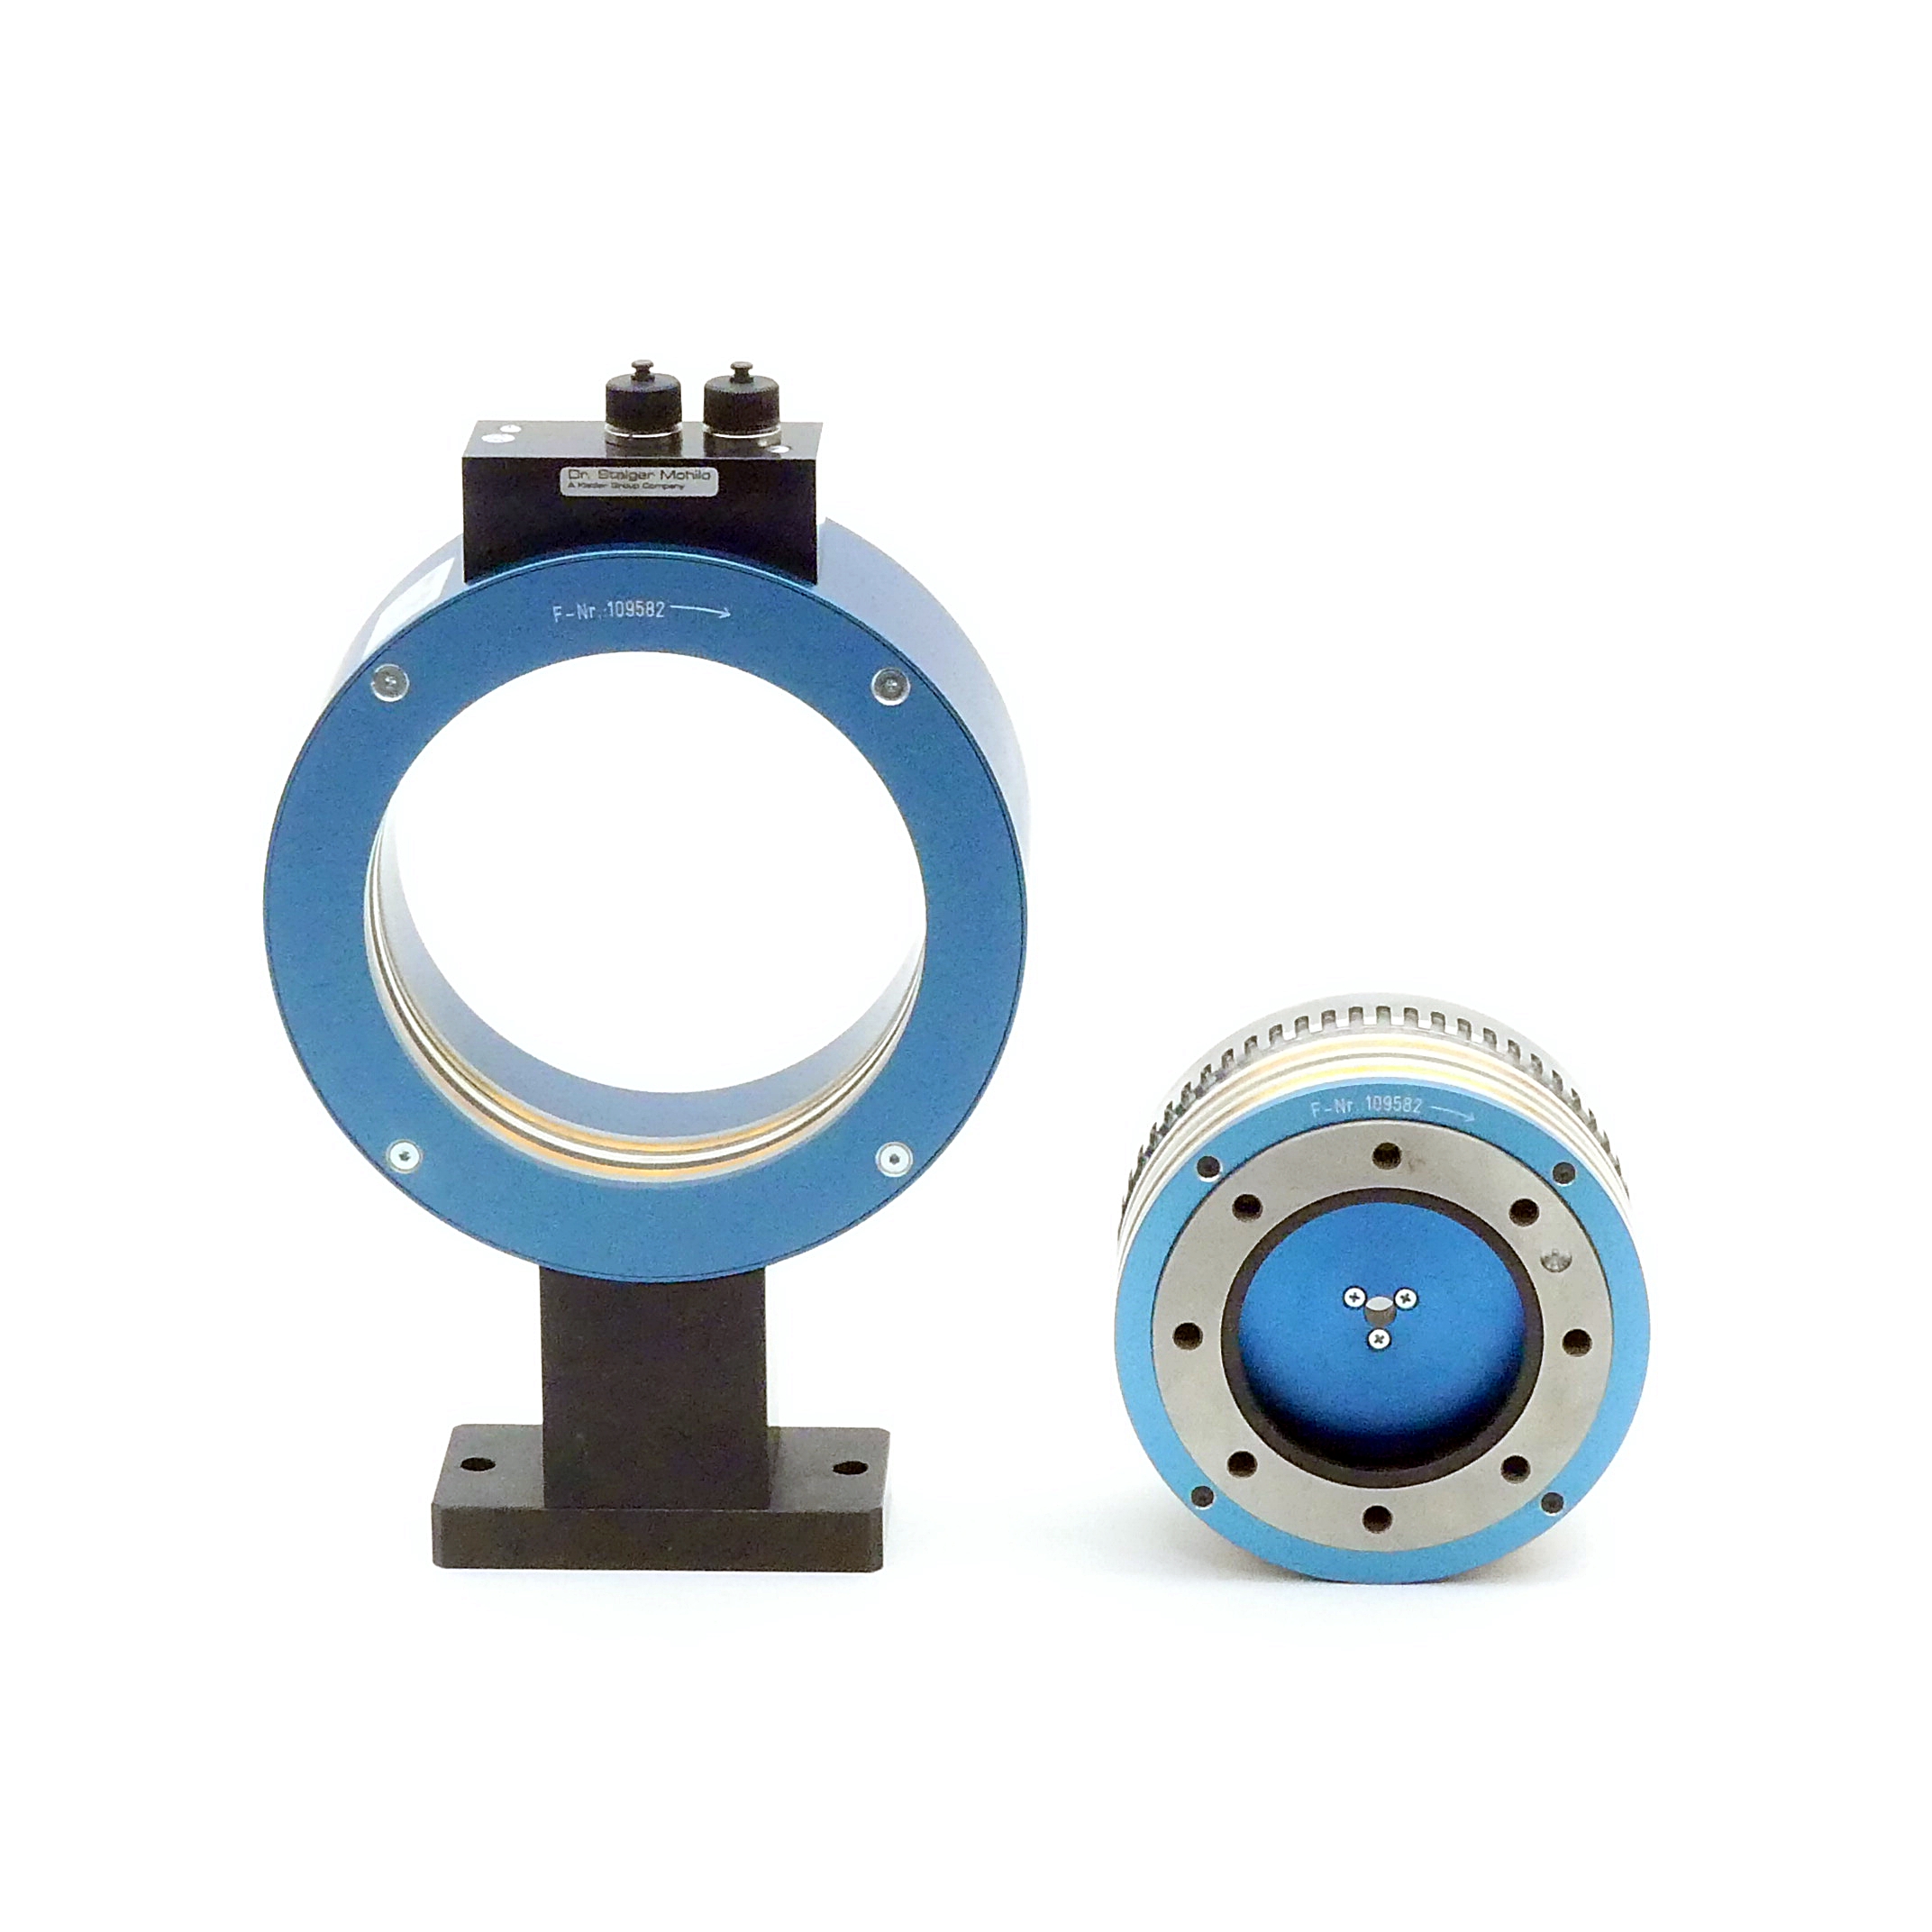 Torque- Measuring Flange 4510B with Inner ring 